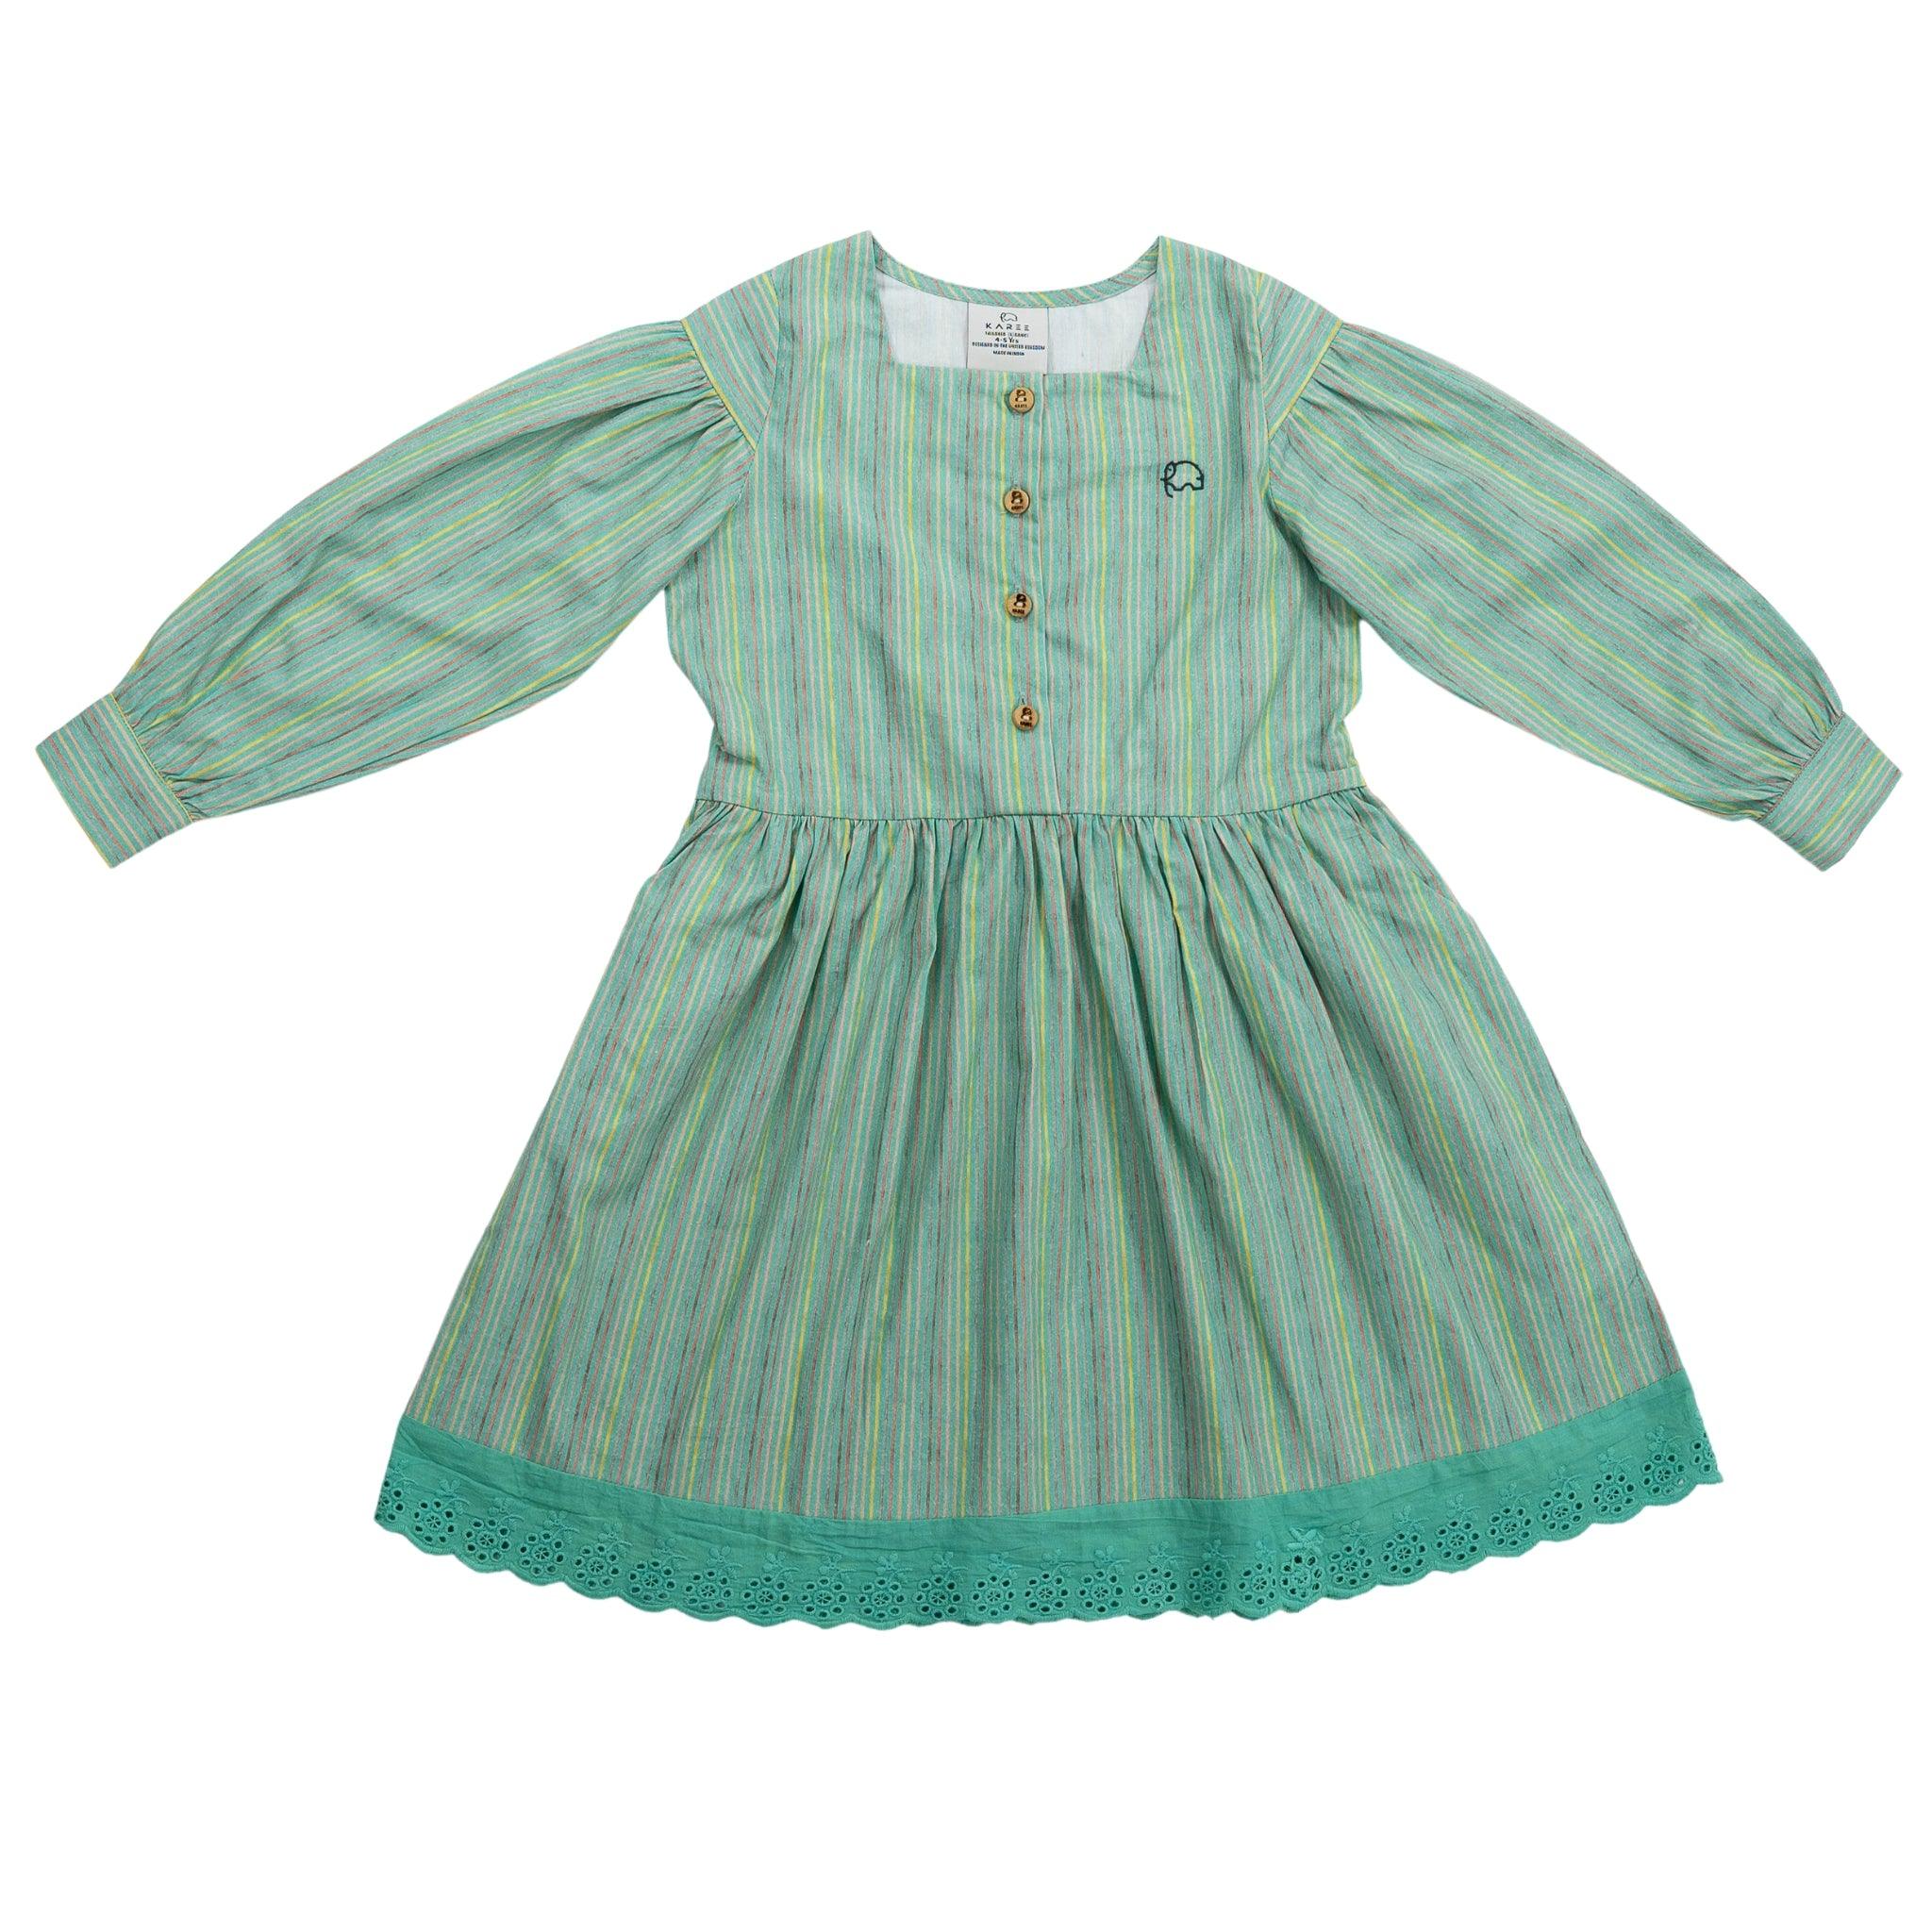 A Karee Green Striped Long Puff Sleeve Cotton Dress with lace trim.